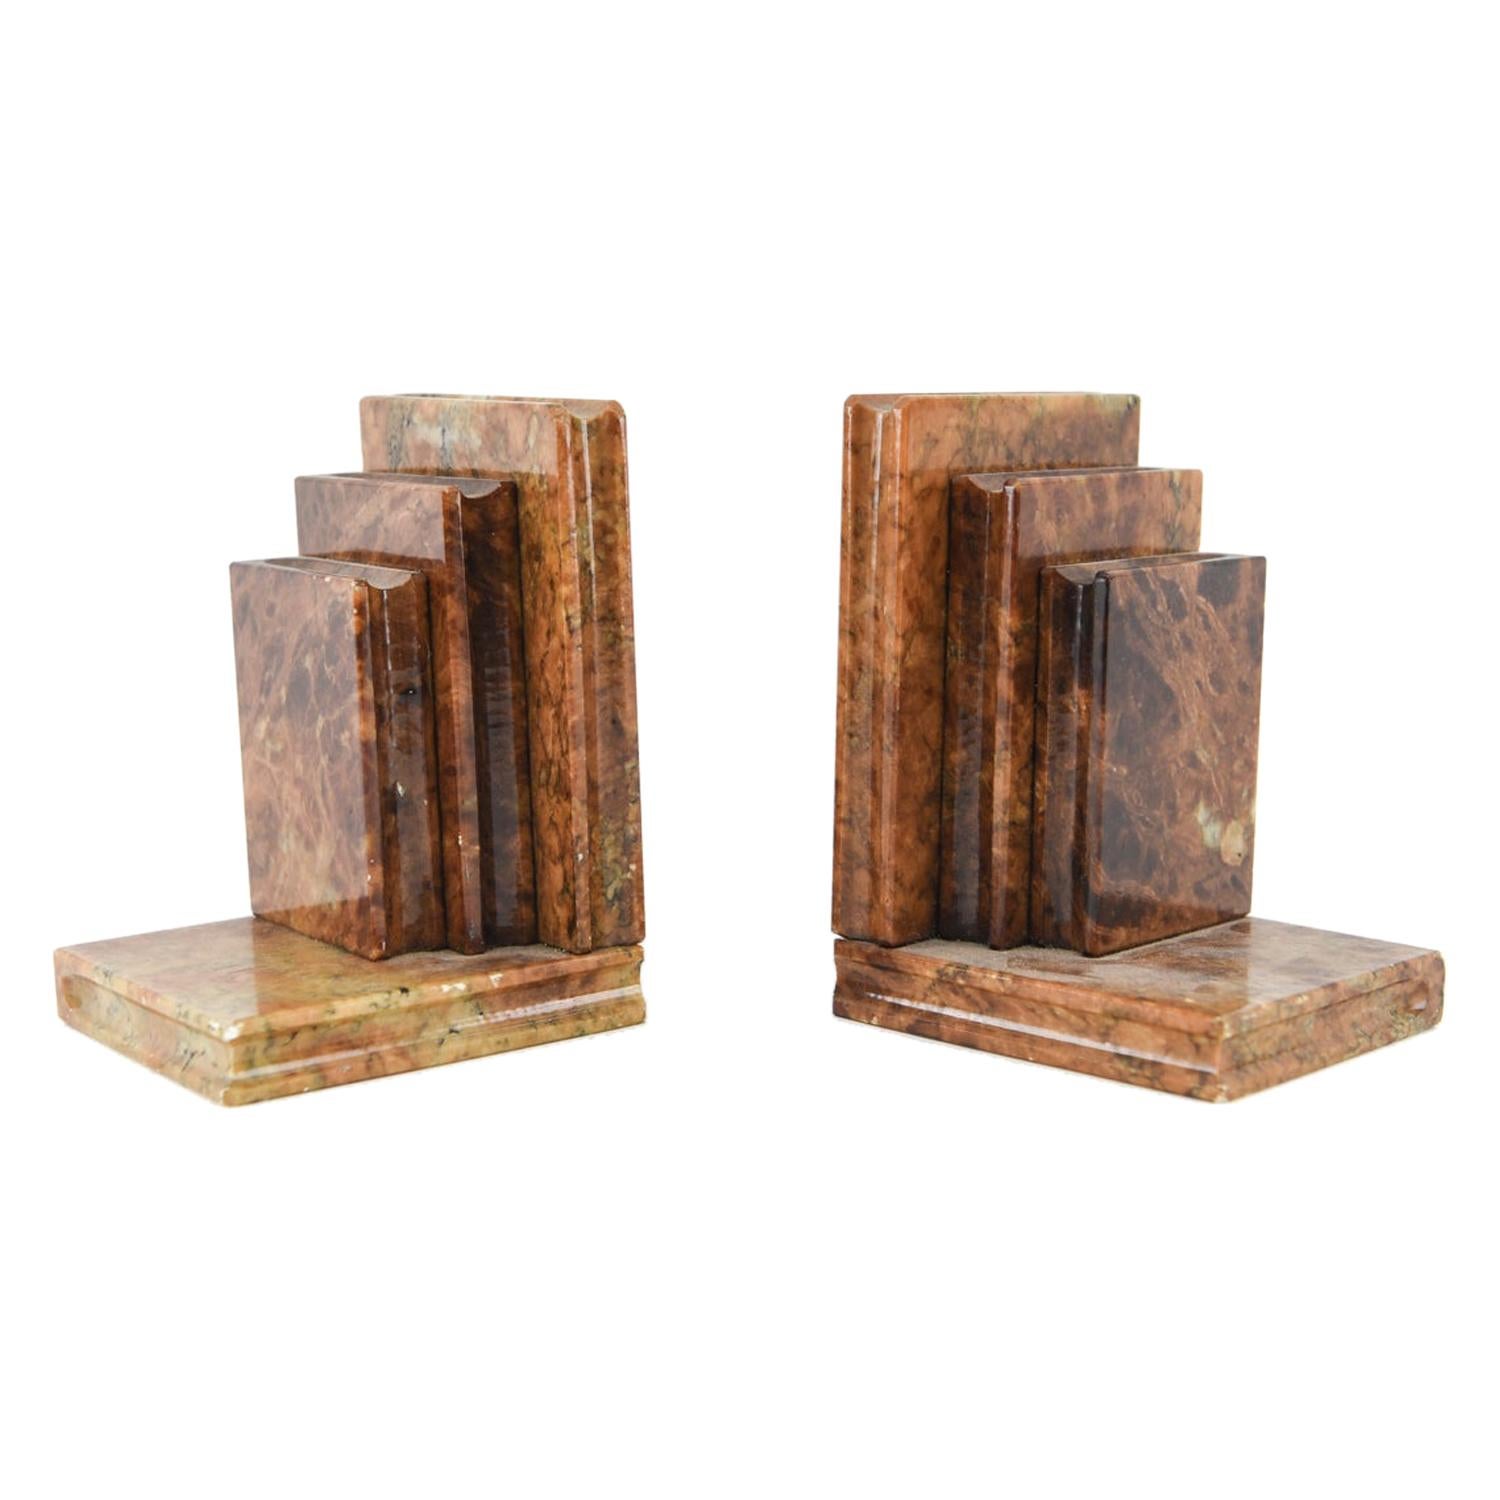 Pair of Midcentury Italian Alabaster Stacked-Book Bookends, Manner of Noymer